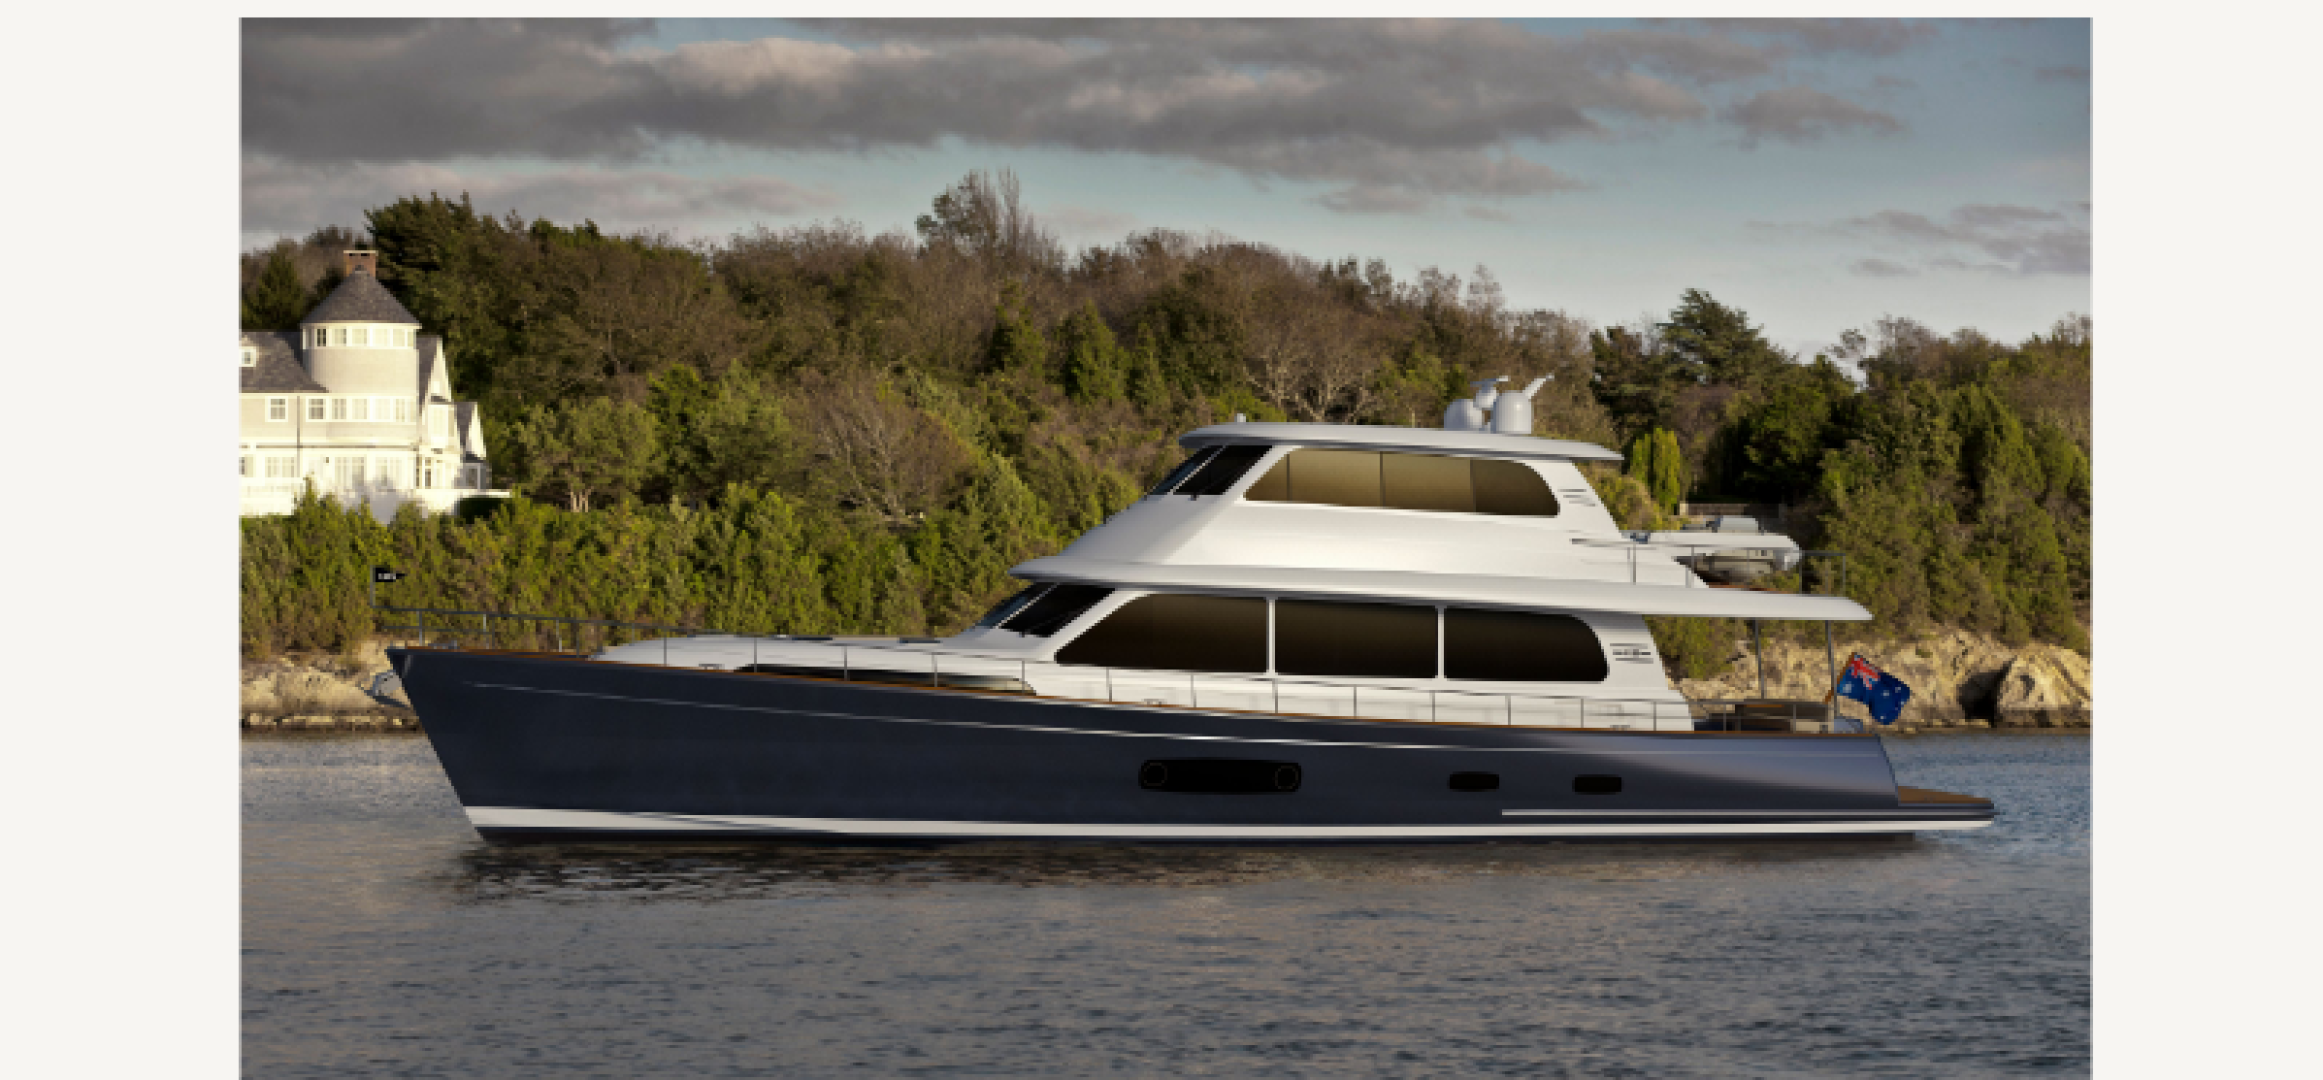 Grand Banks Yachts introduces the new flagship GB85 at 2022 Palm Beach Intl Boat Show